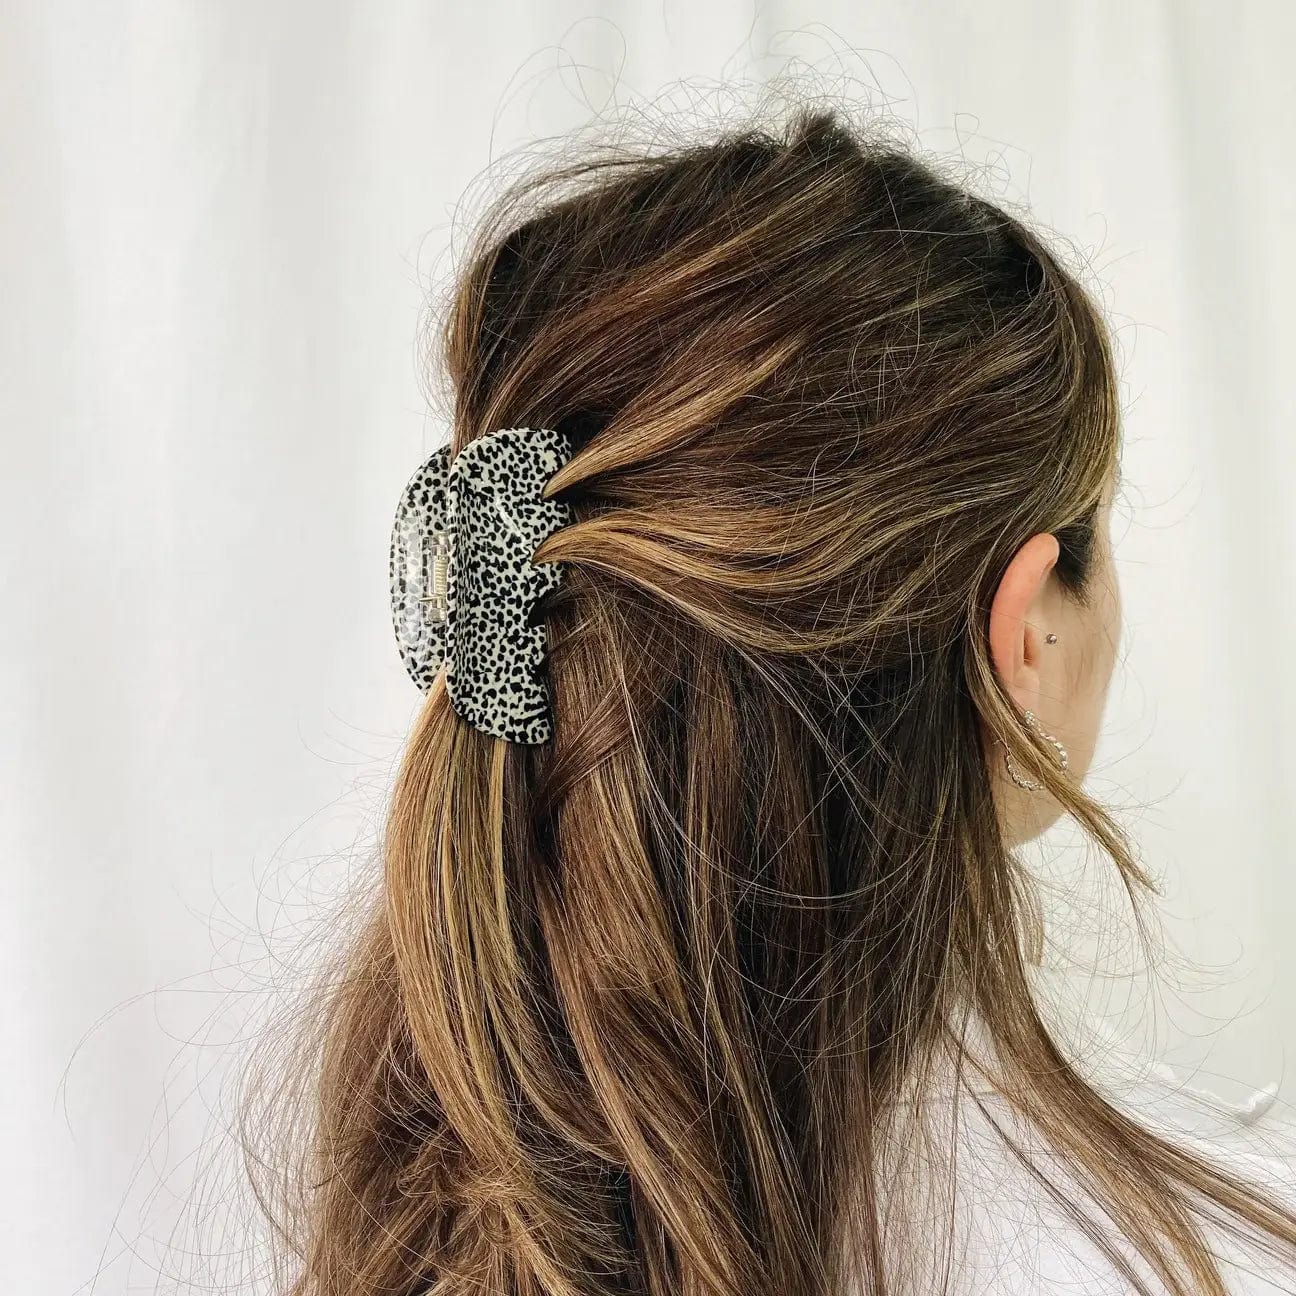 The Blonda Hair Accessories Horace Jewelry   